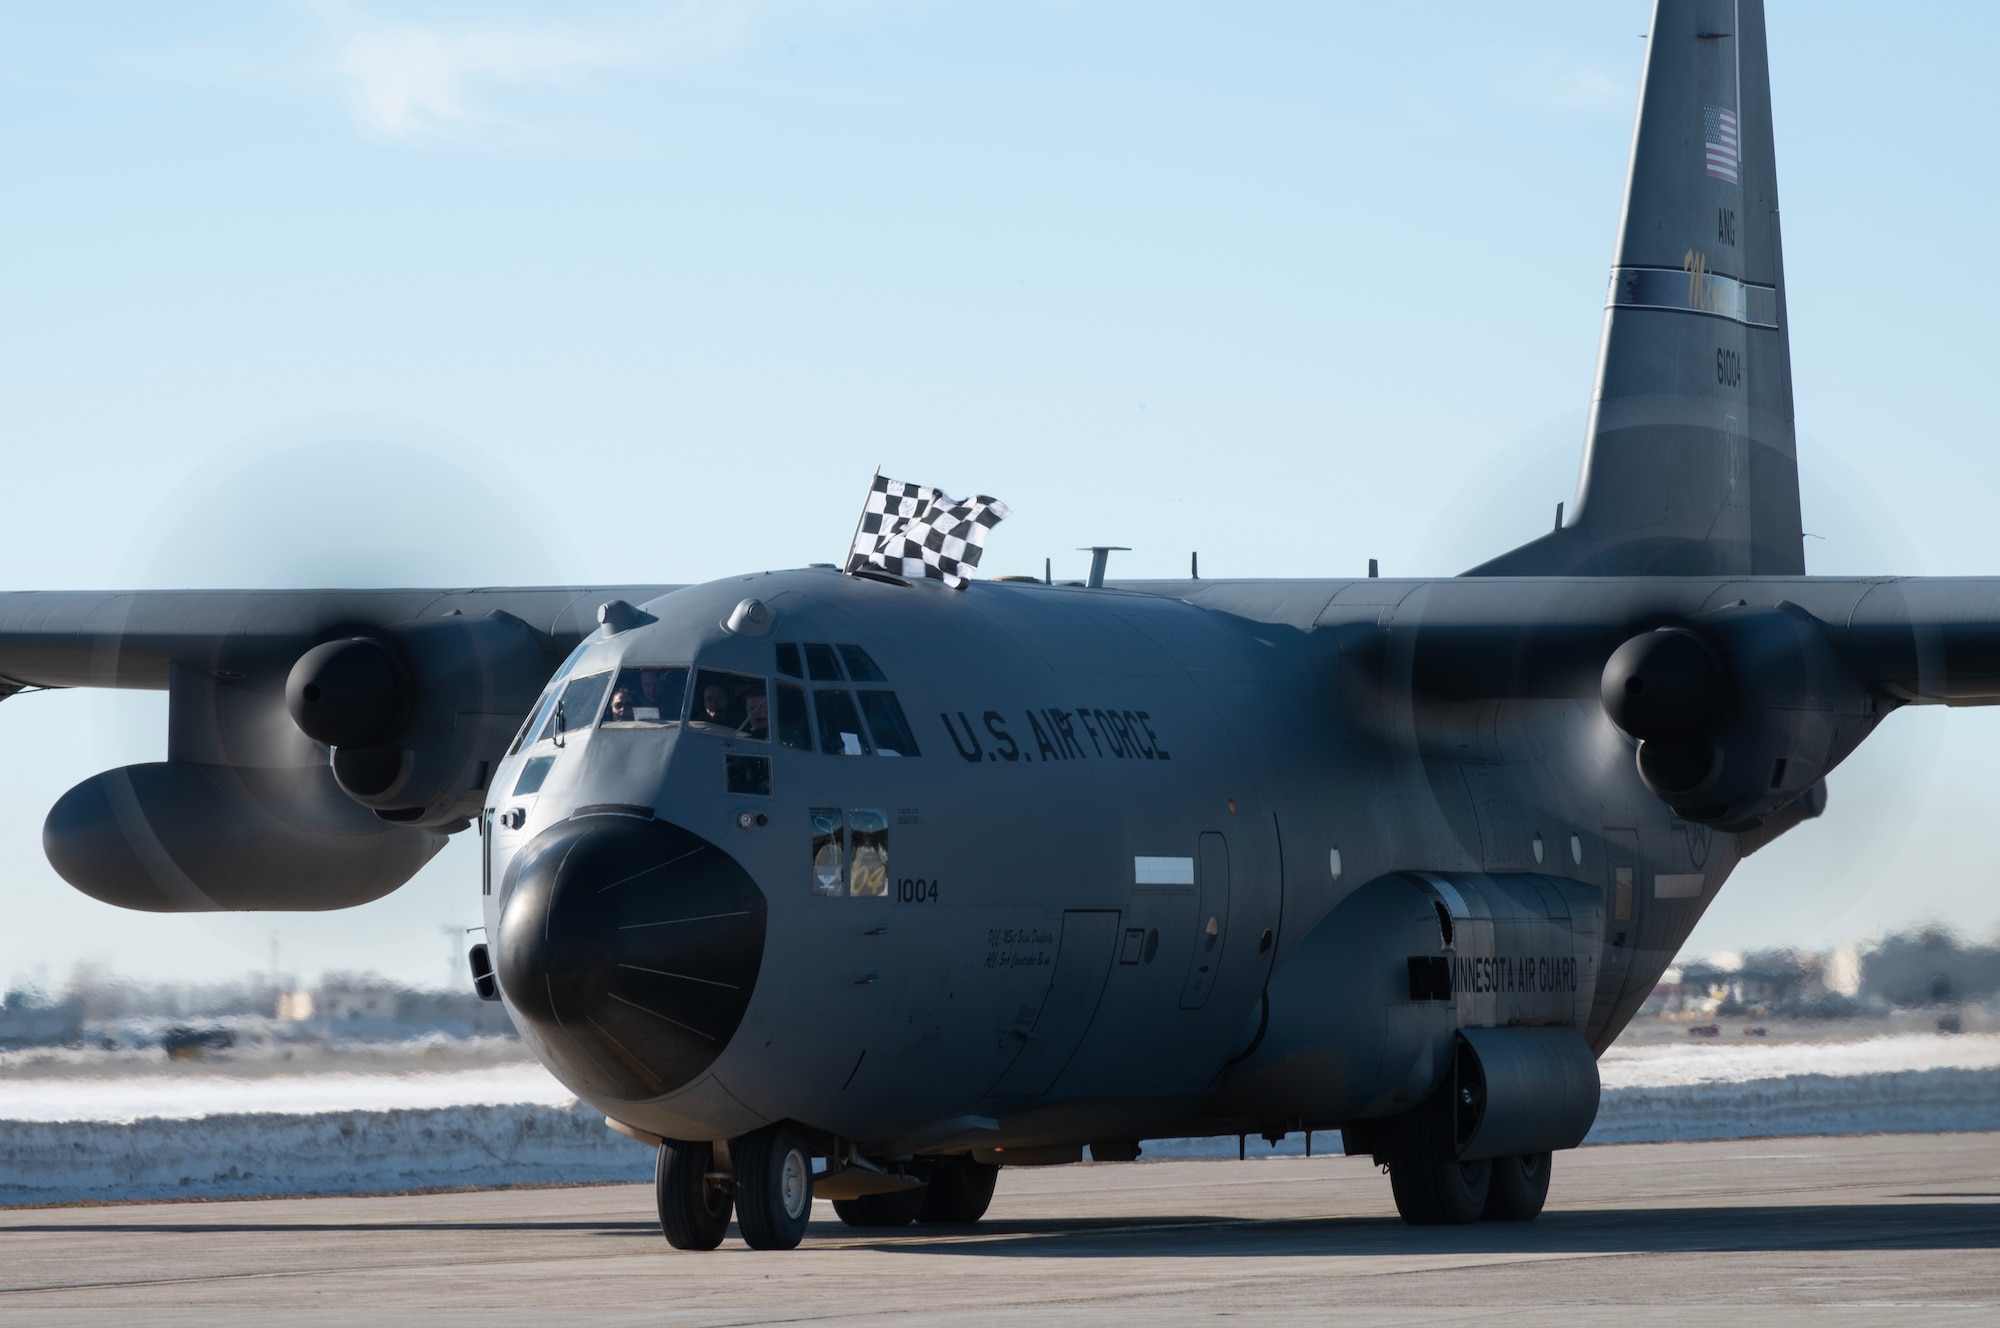 U.S. Air Force Col. James Cleet, 133rd Airlift Wing commander, taxies a C-130 Hercules during his fini-flight in St. Paul, Minn., Feb. 13, 2023.